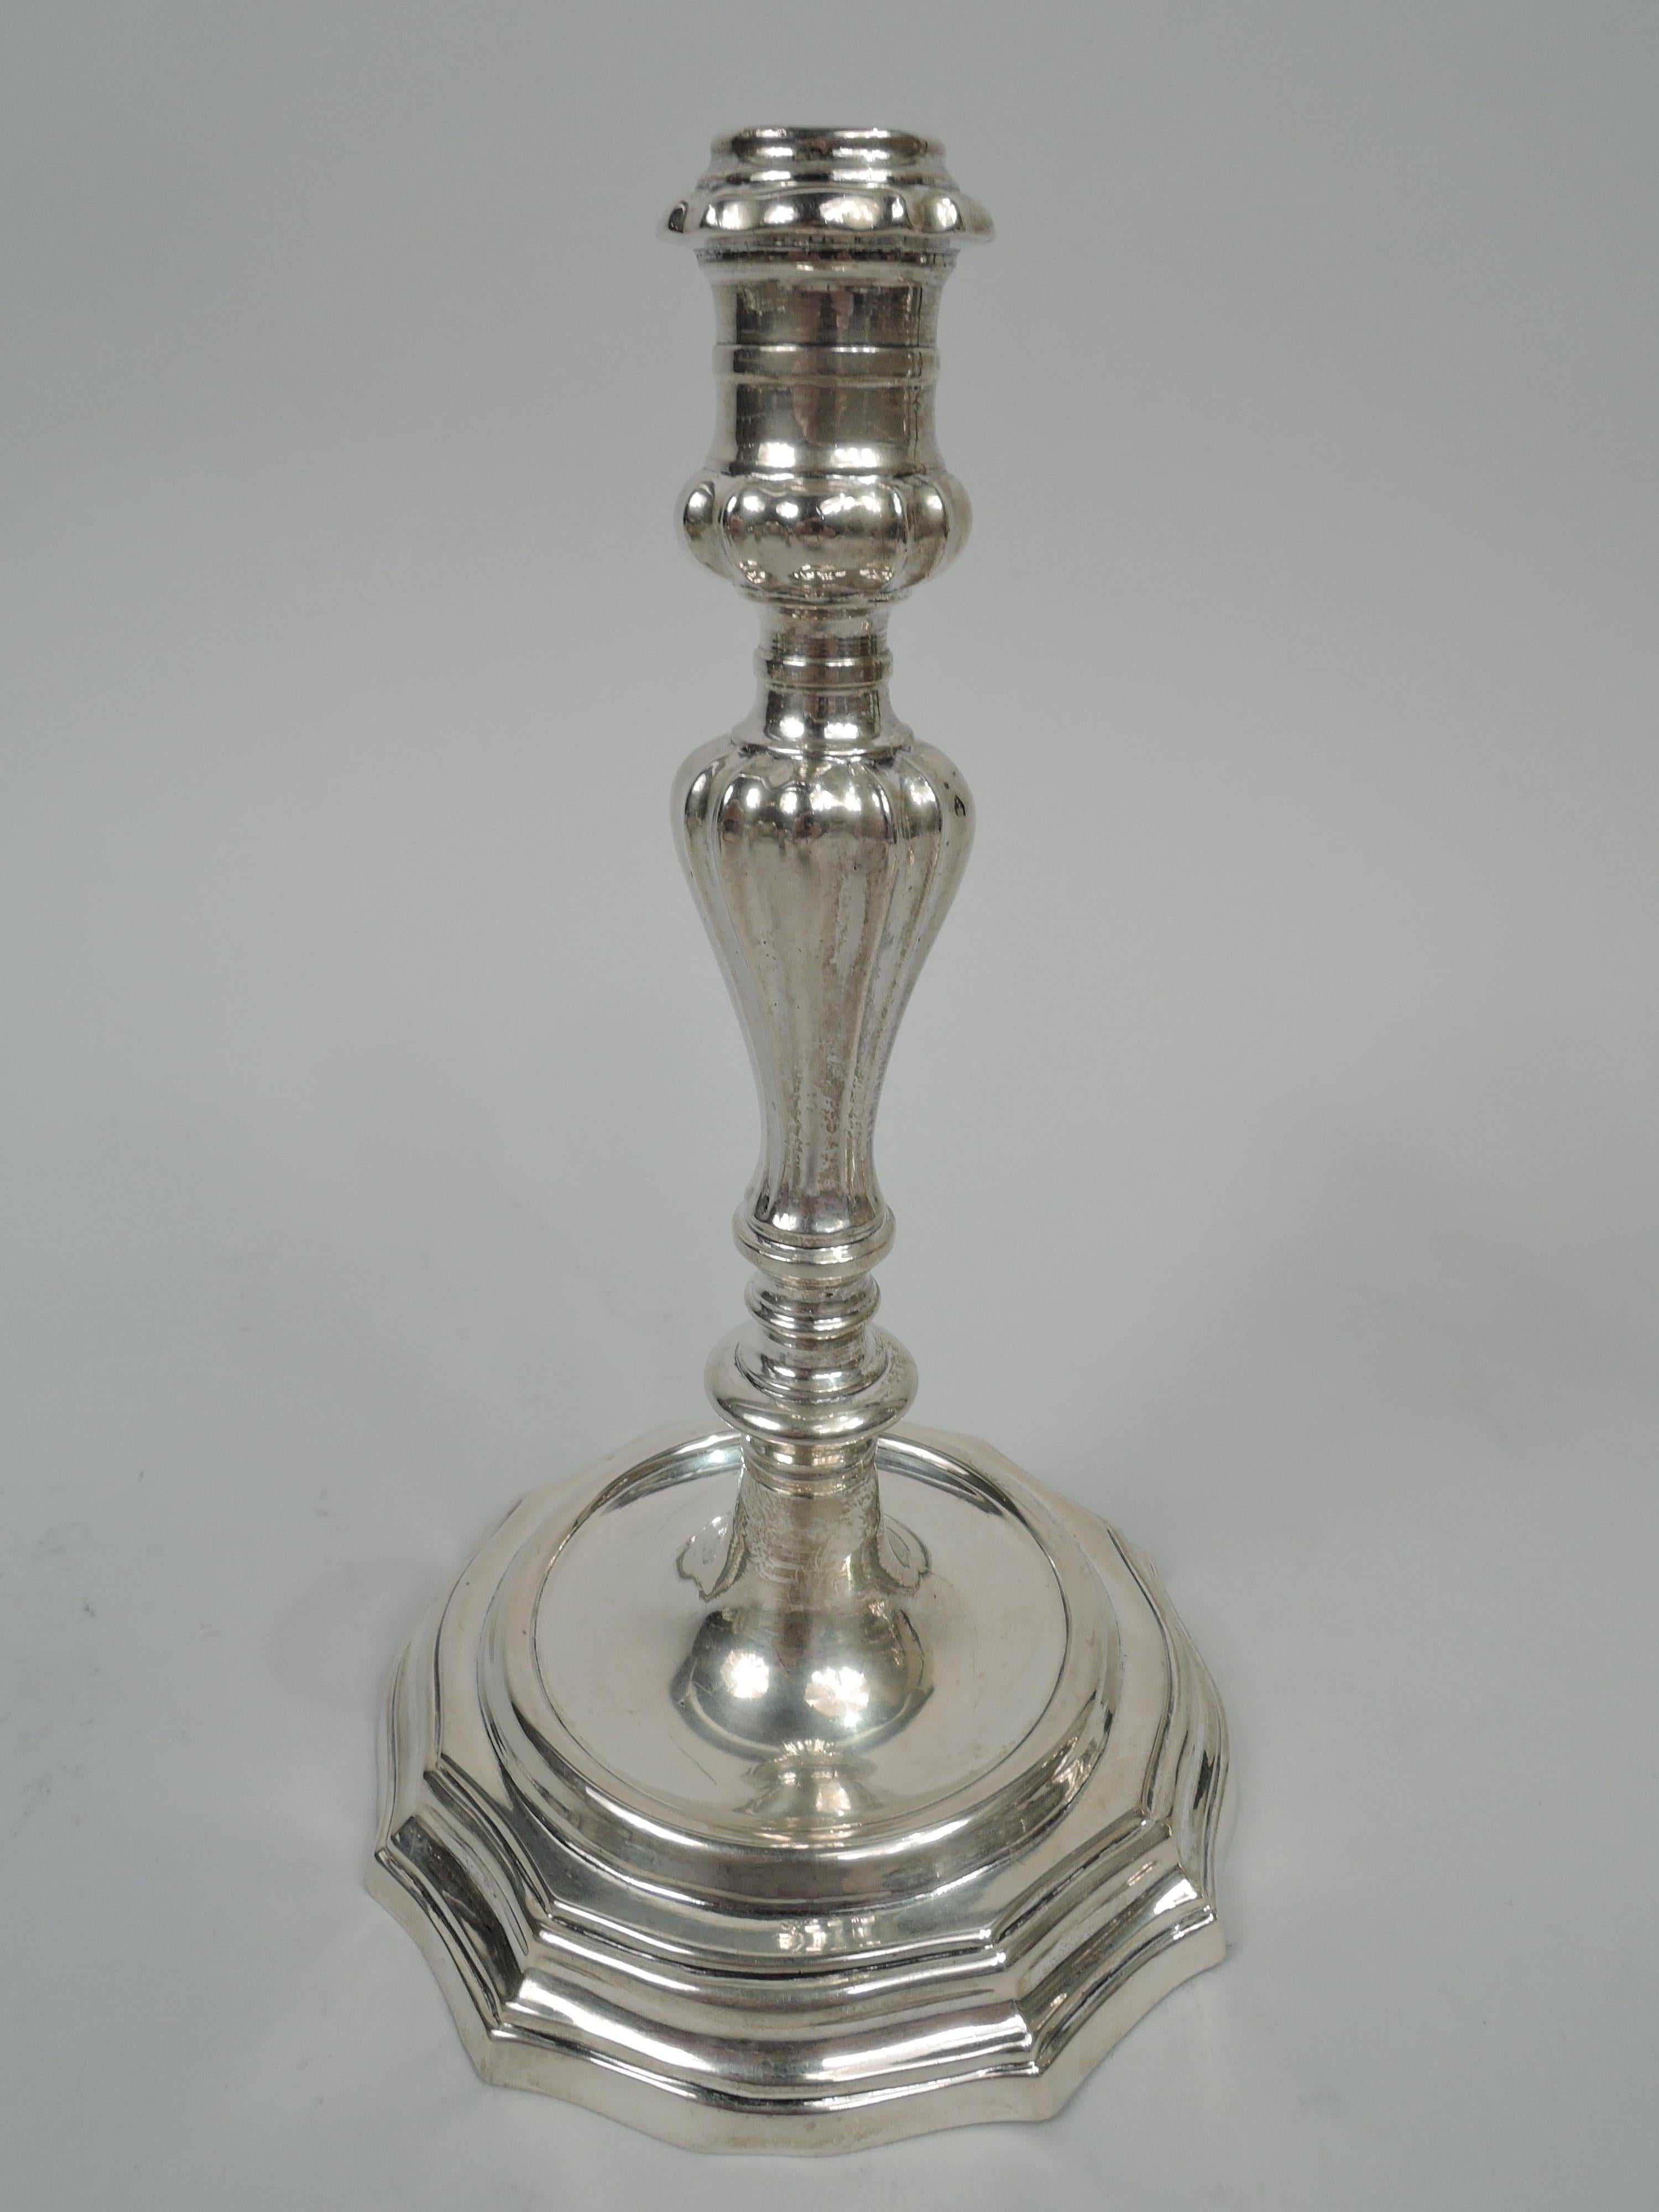 Pair of Italian classical silver candlesticks, circa 1775. Each: banded campana socket on same spool support mounted to knopped baluster shaft stepped and shaped round foot. Fluting and lobing. On foot rim are city stamp (Florence), assayer’s stamp